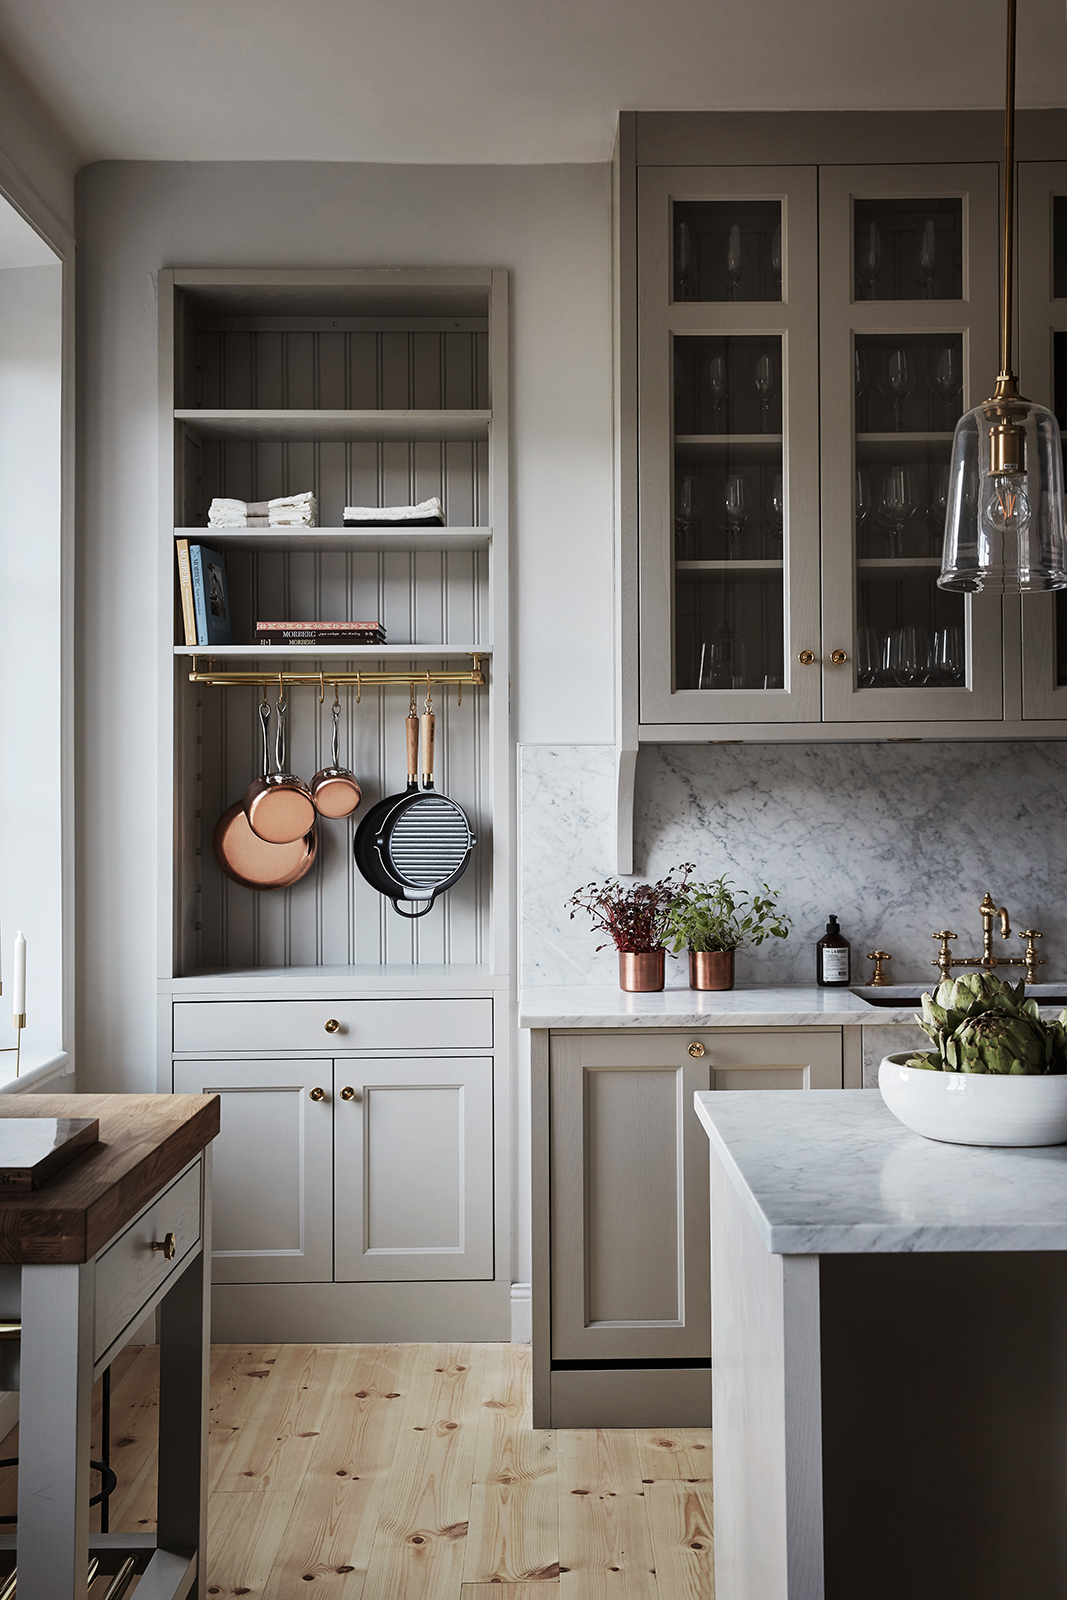 8 Great Neutral Cabinet Colors For Kitchens The Grit And Polish